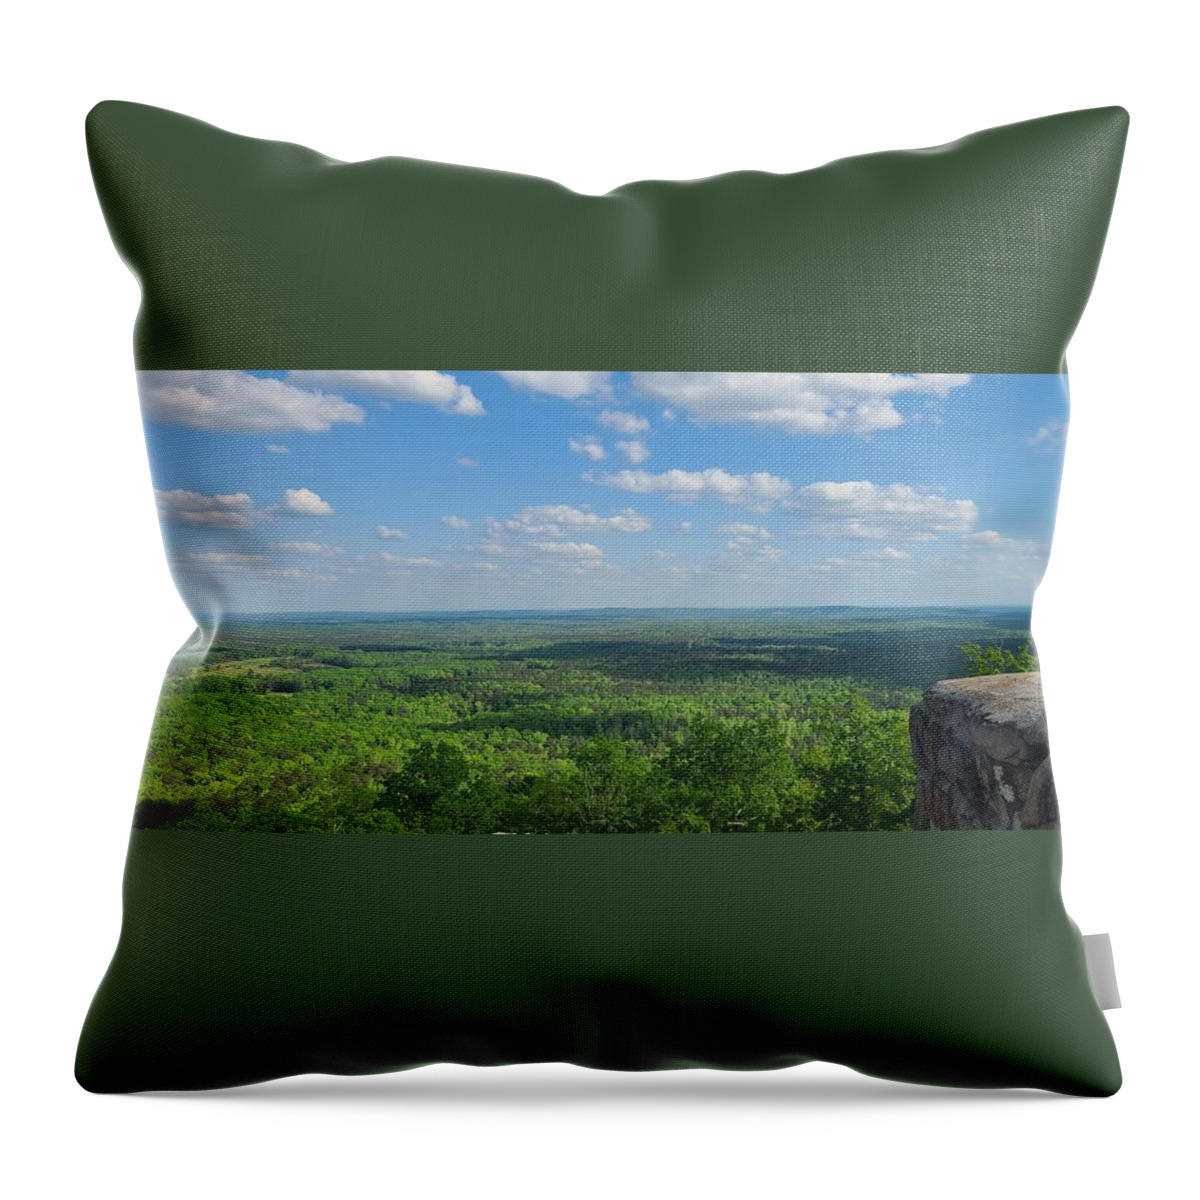 Dowdell Knob Throw Pillow featuring the photograph Dowdell Knob at Roosevelt State Park by Aaron Martens